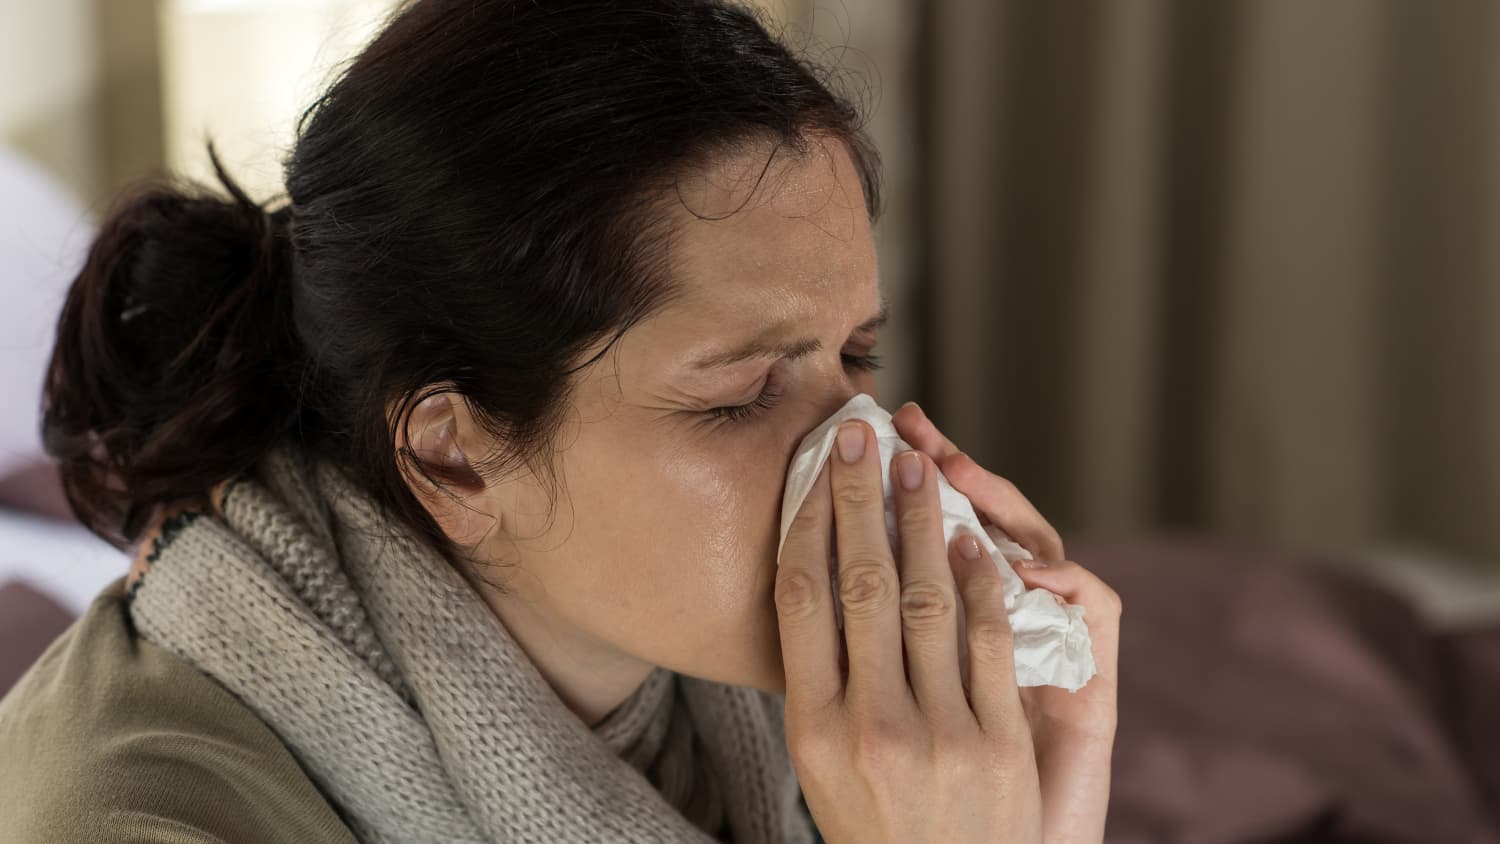 young-sick-woman-sneezing-in-tissue-sweating-from-flu-fever-SBI-300904846